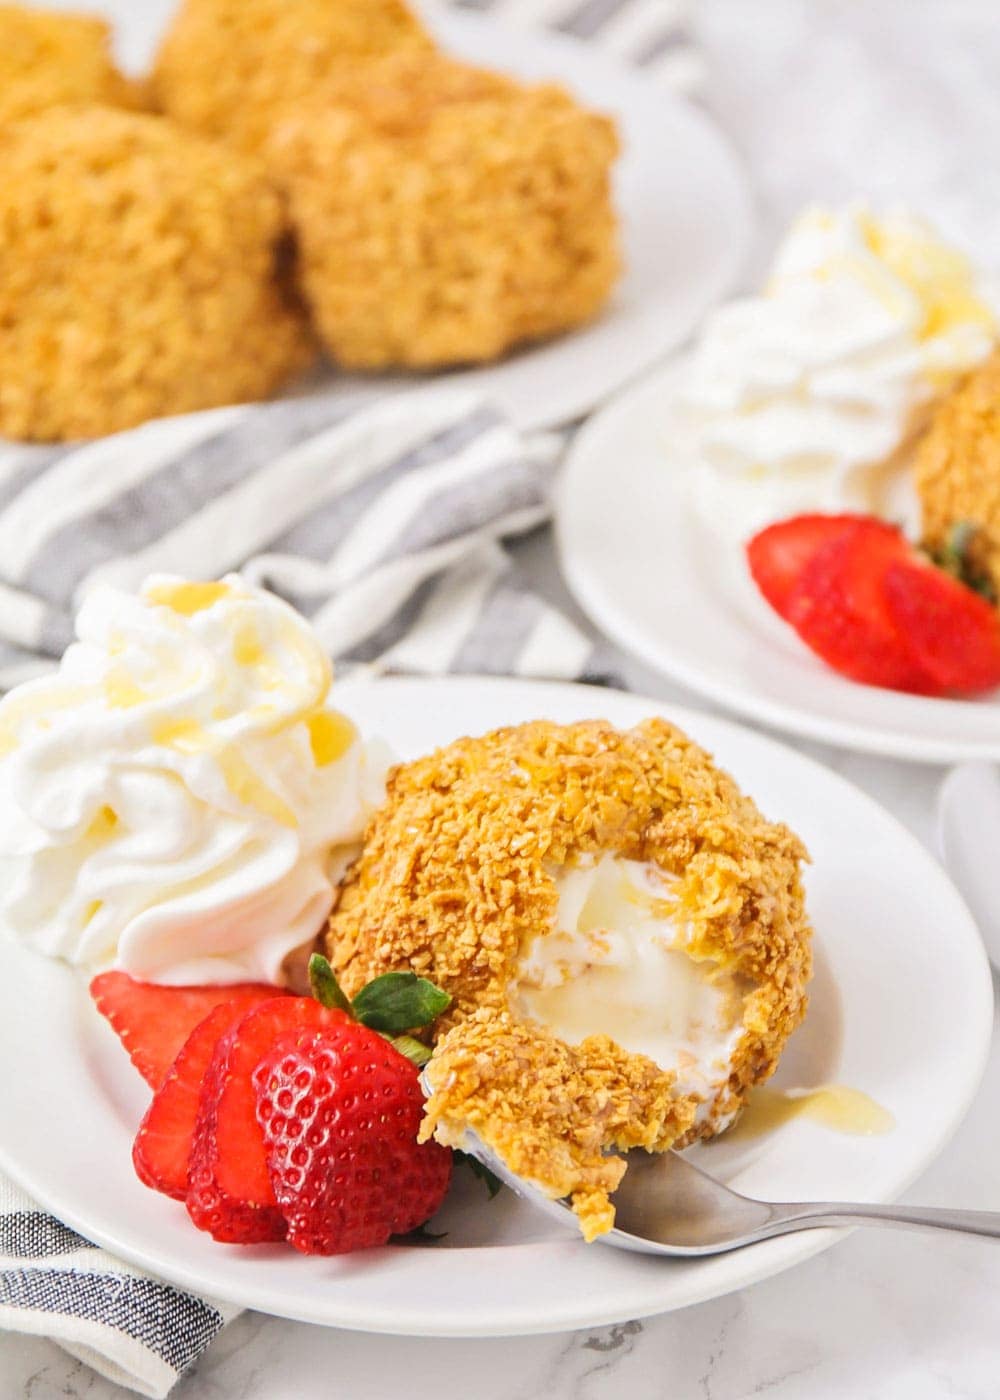 Fried ice cream with a missing bite